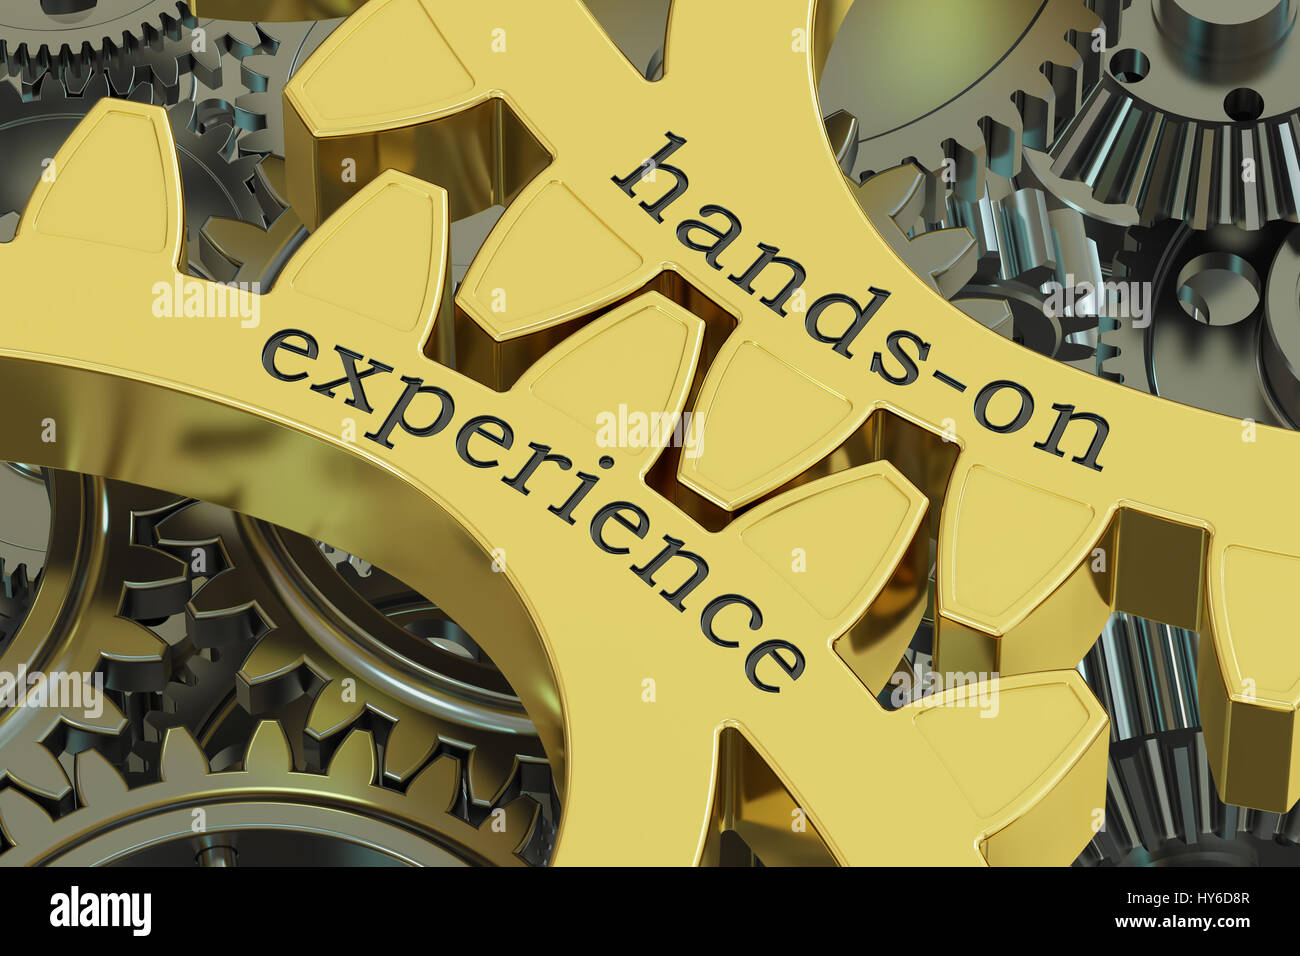 hands-on experience concept on the gear, 3D rendering Stock Photo